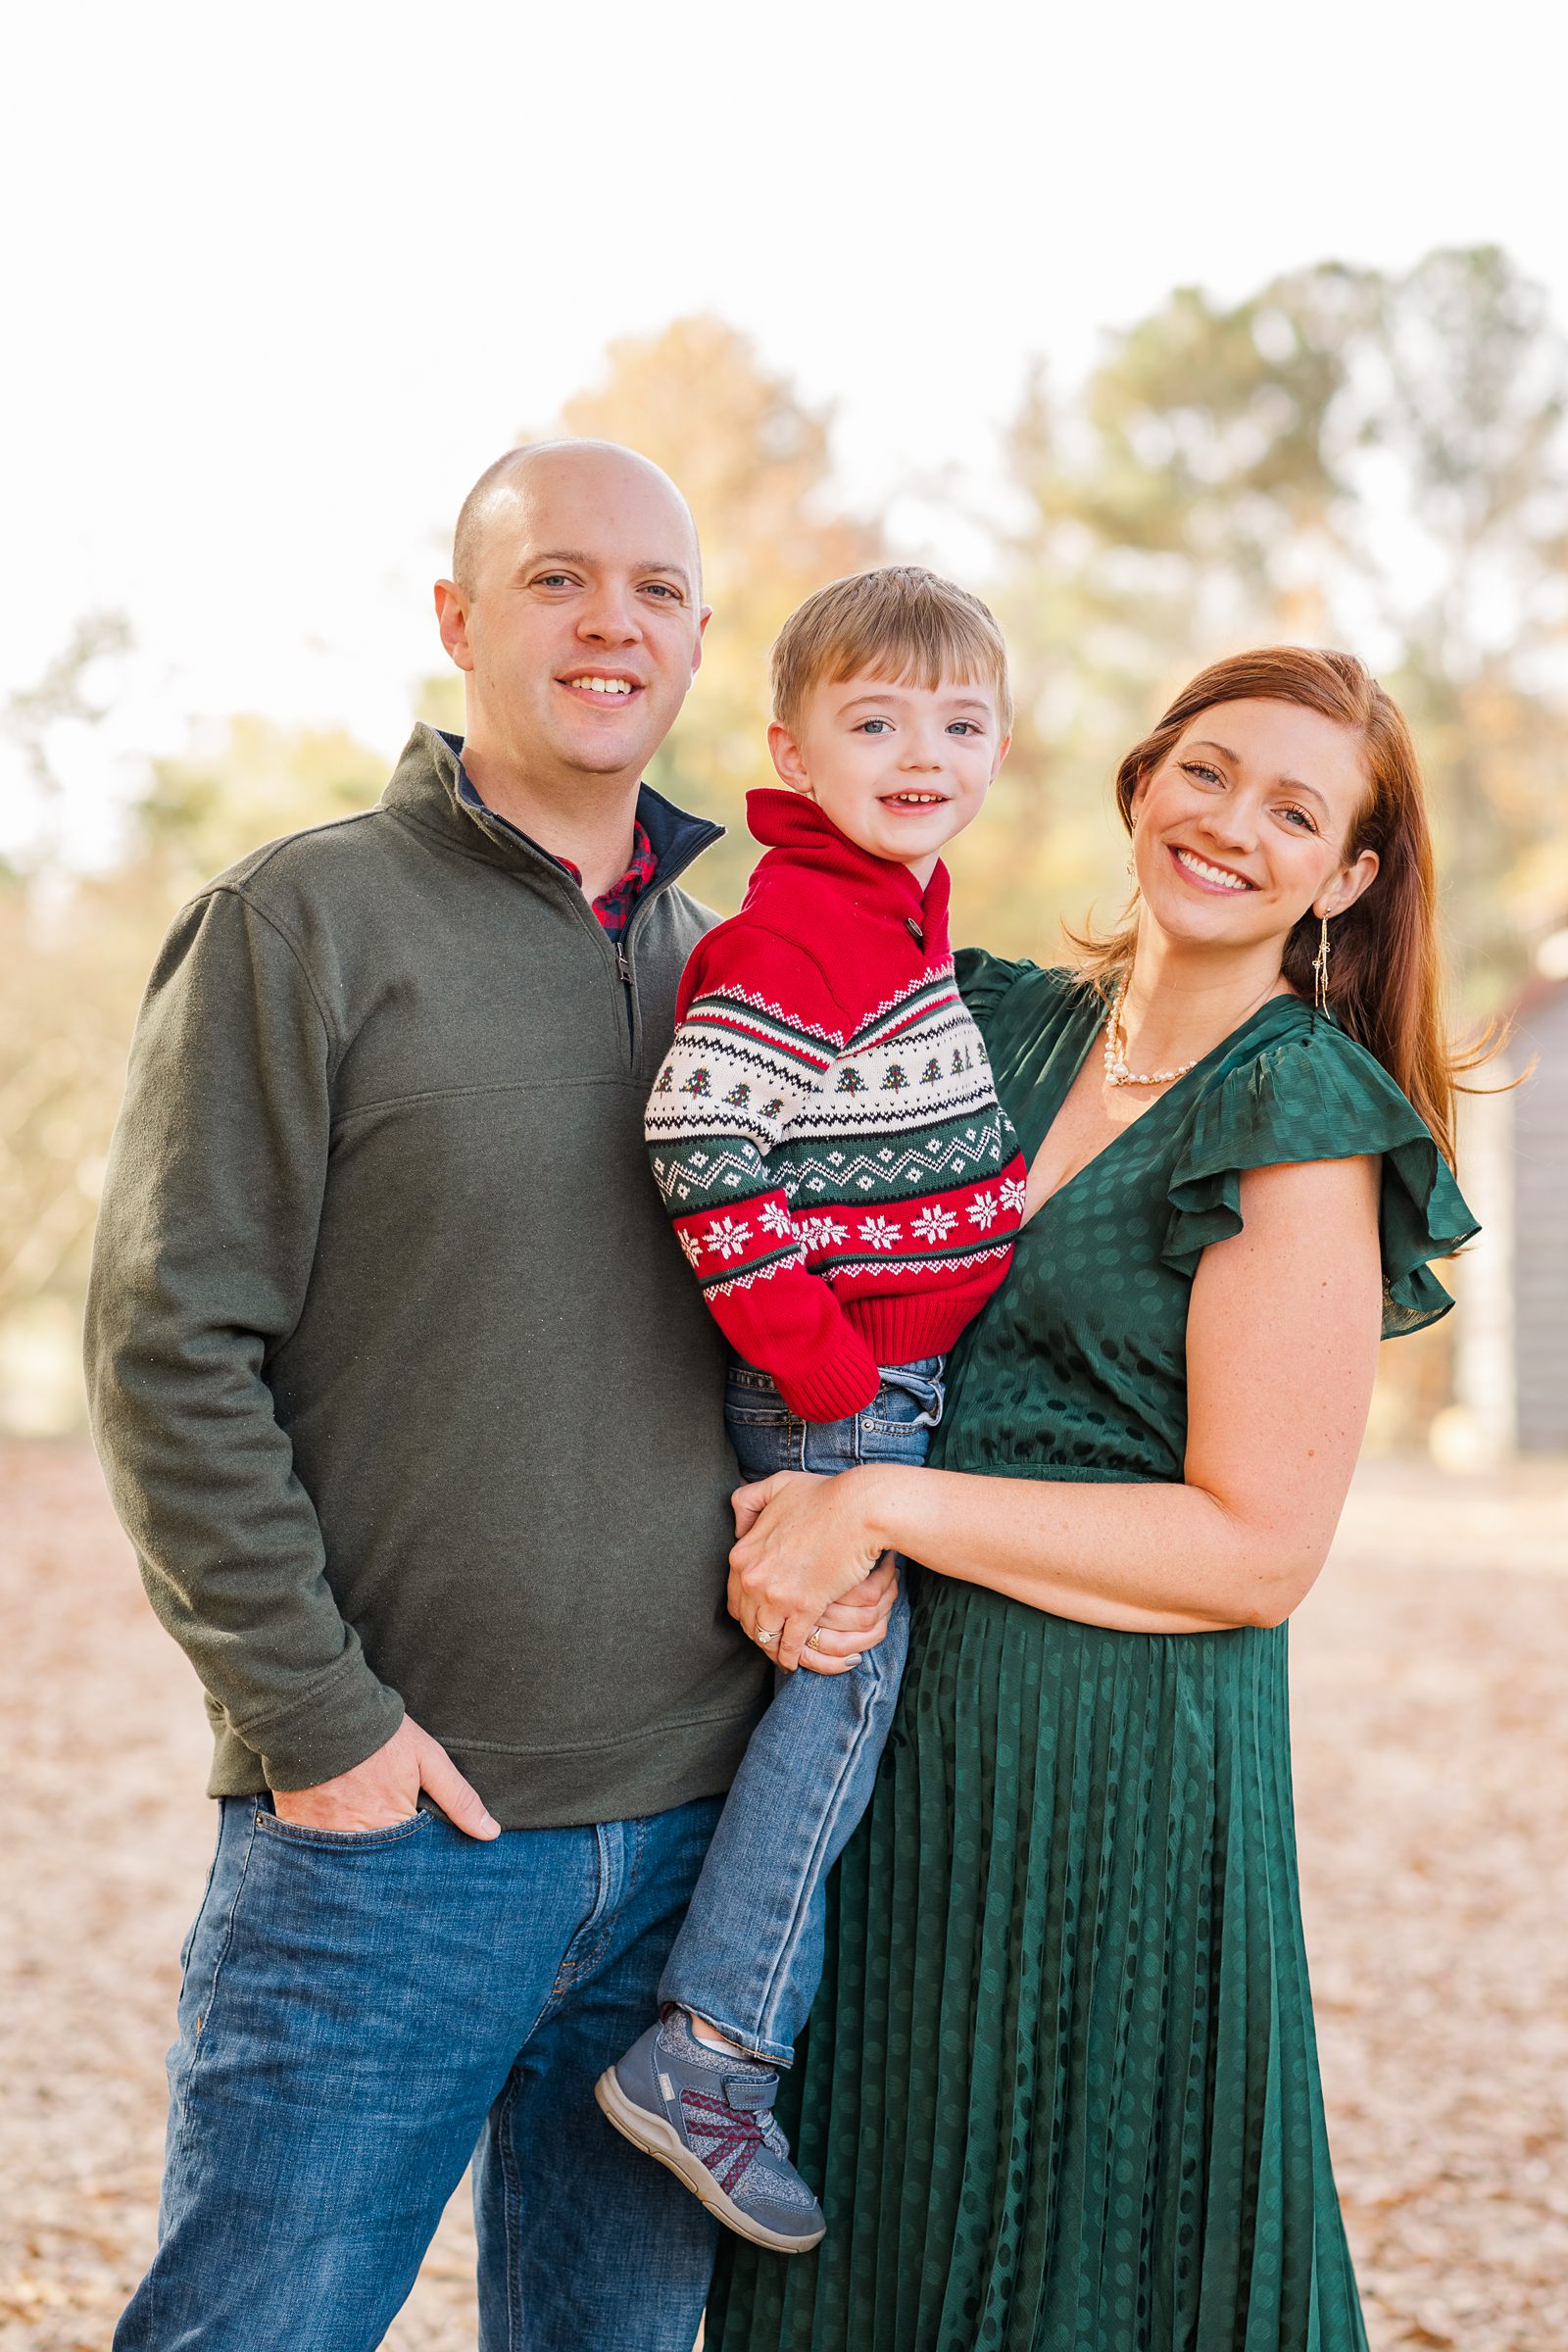 Fall Crump Park Family Session